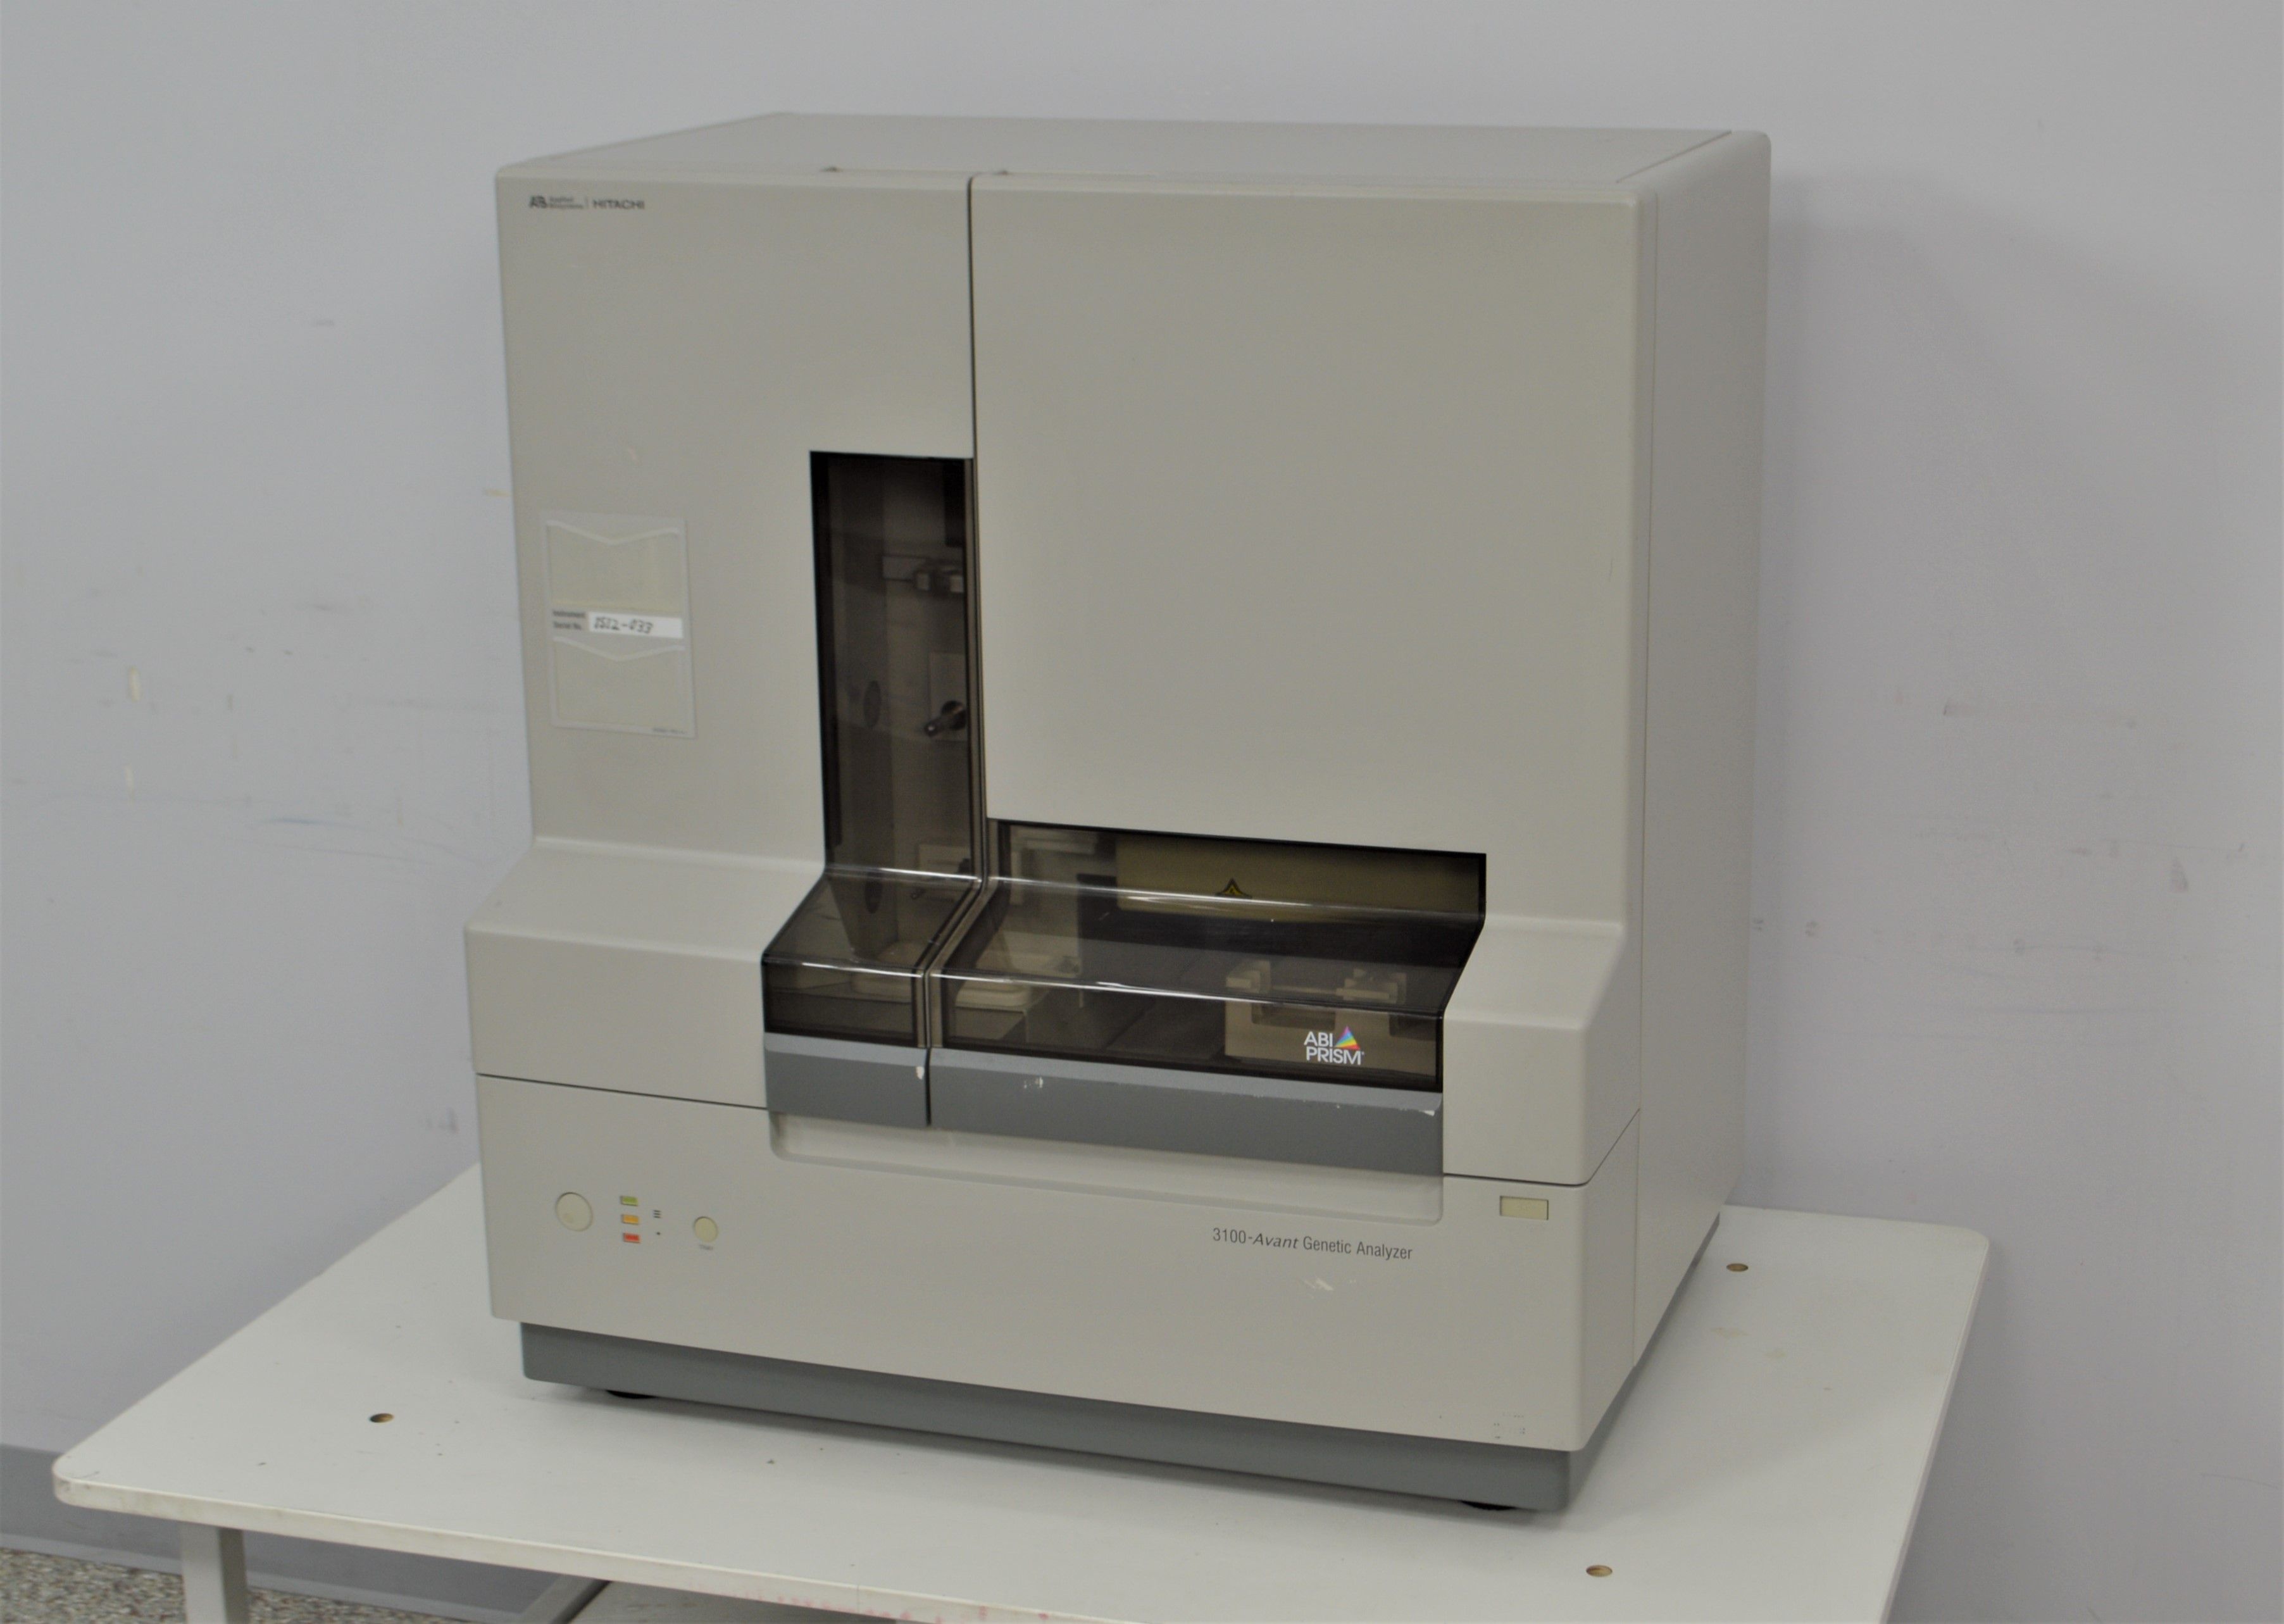 ABI Prism 3100 Genetic Analyzer/DNA Sequencer - Certified with Warranty | For Sale | Labx Ad 10375662